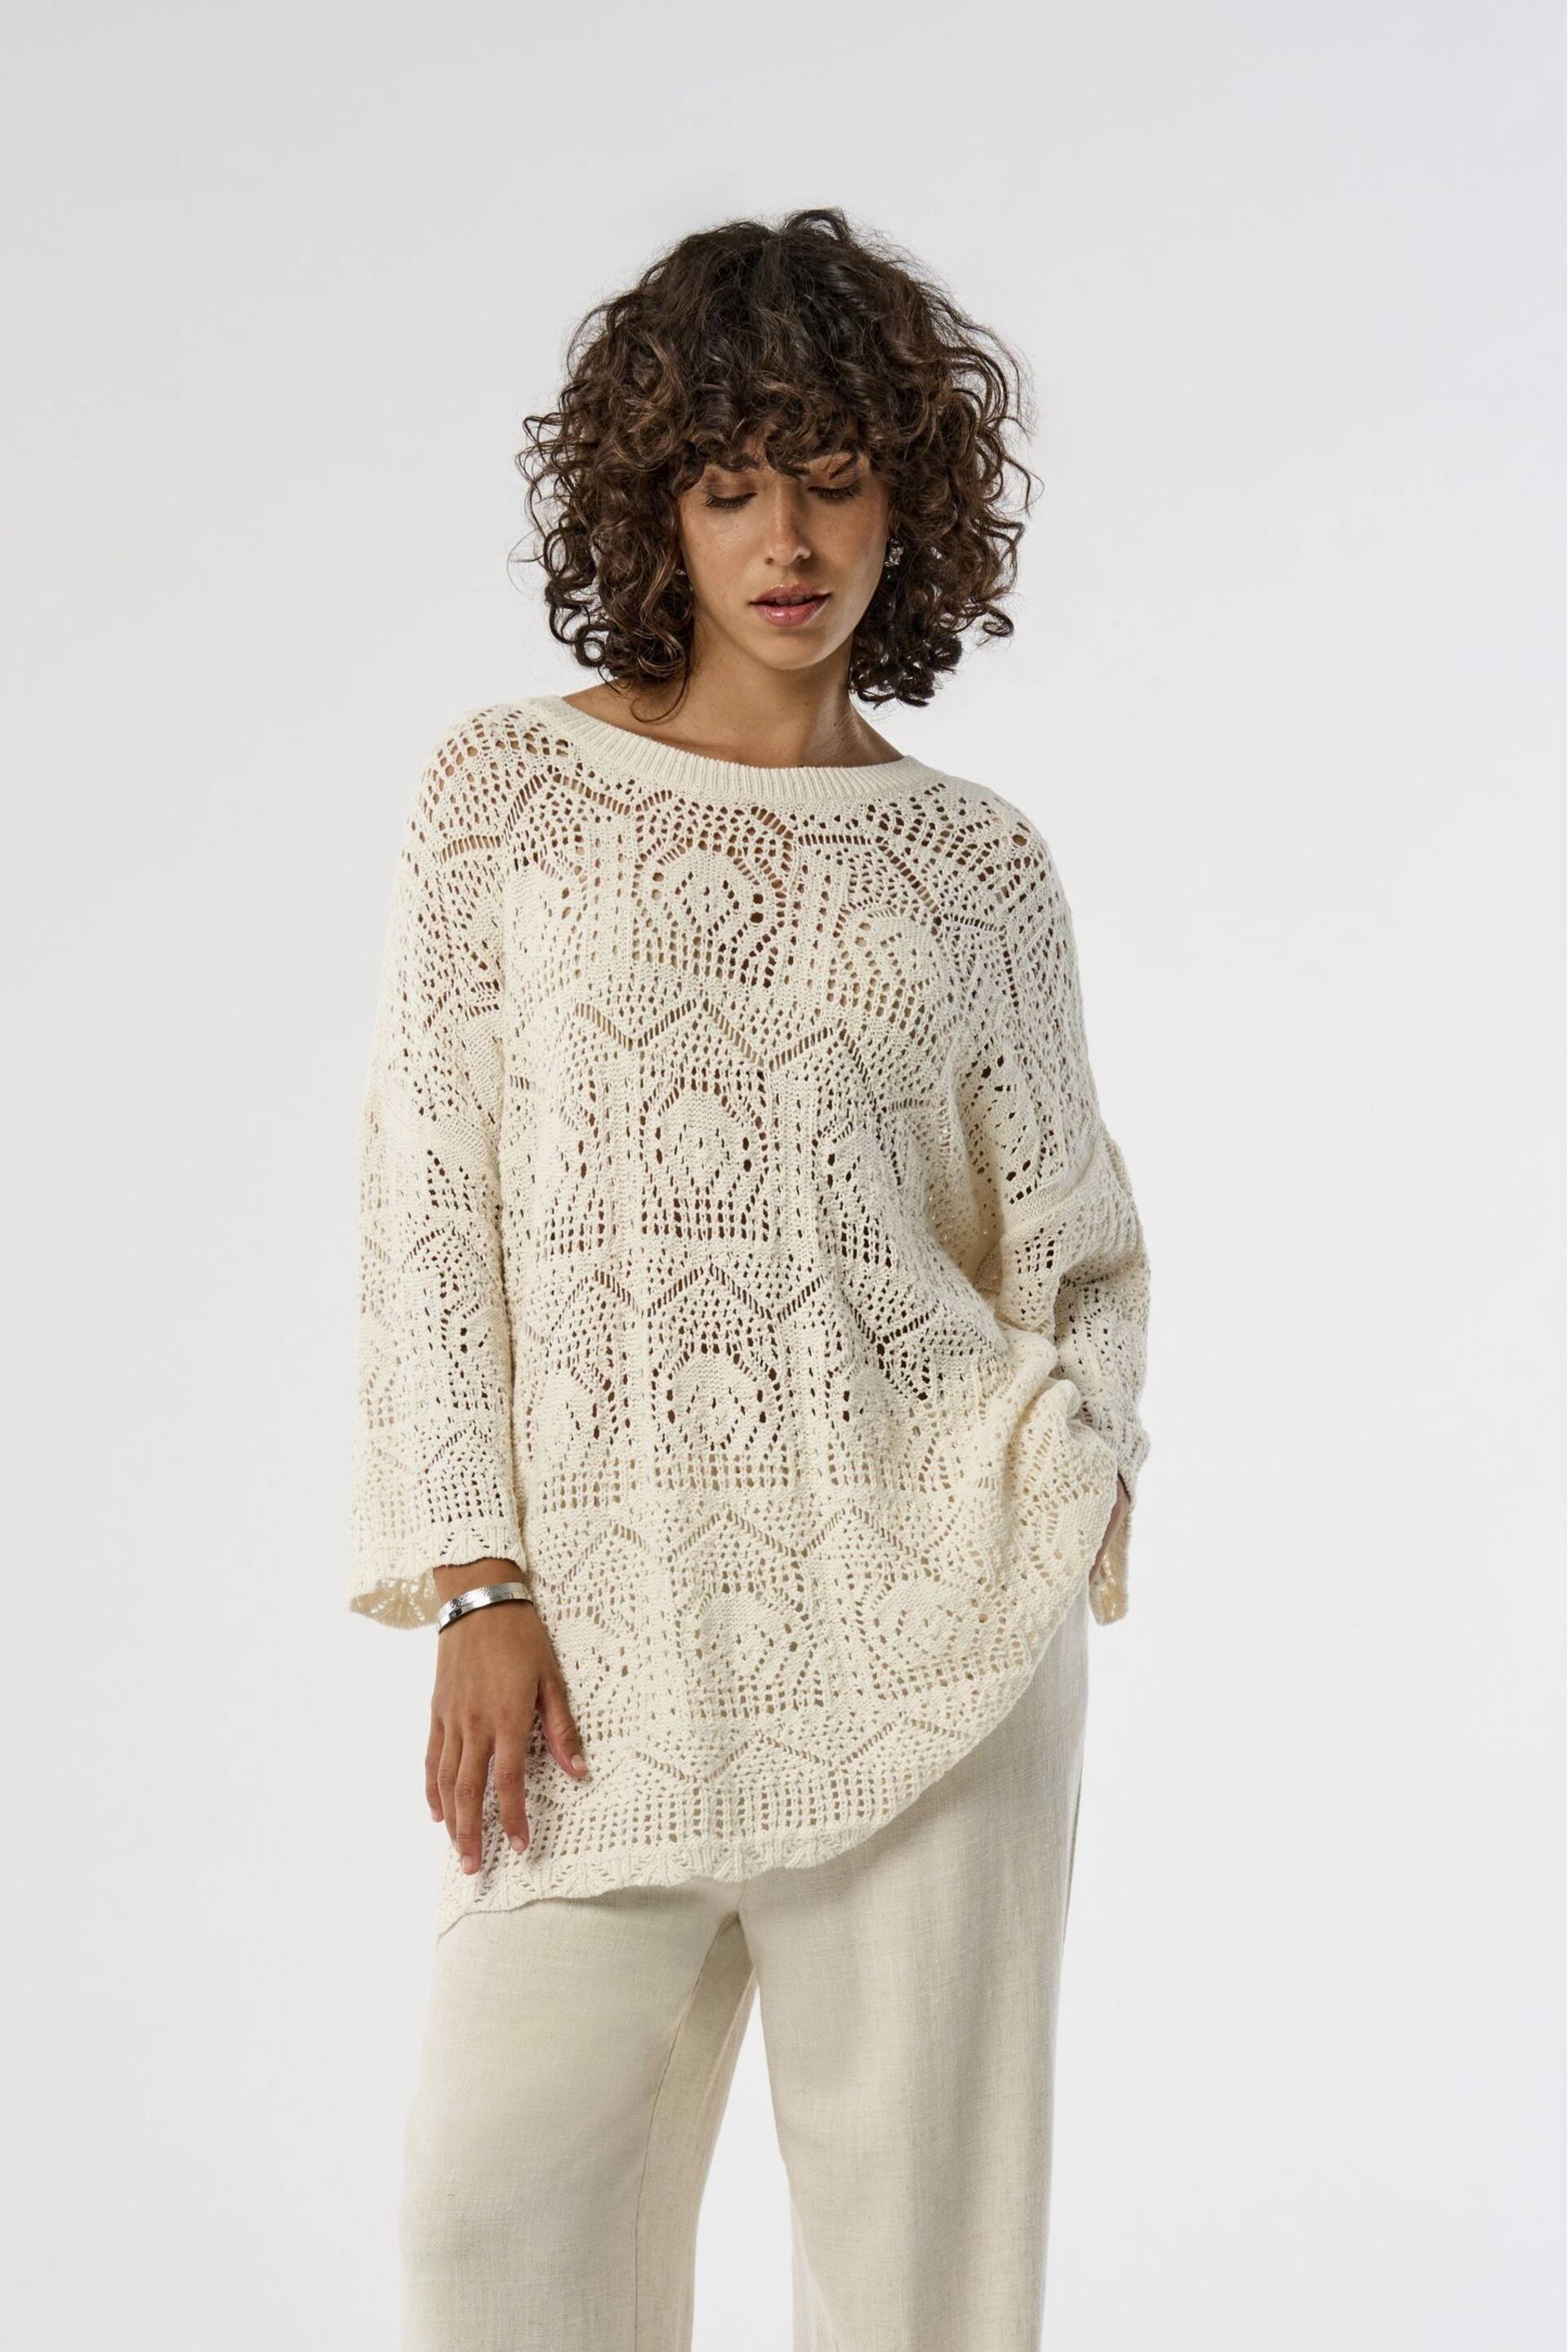 ONLY White Relaxed Fit Crochet Beach Dress - Image 7 of 8